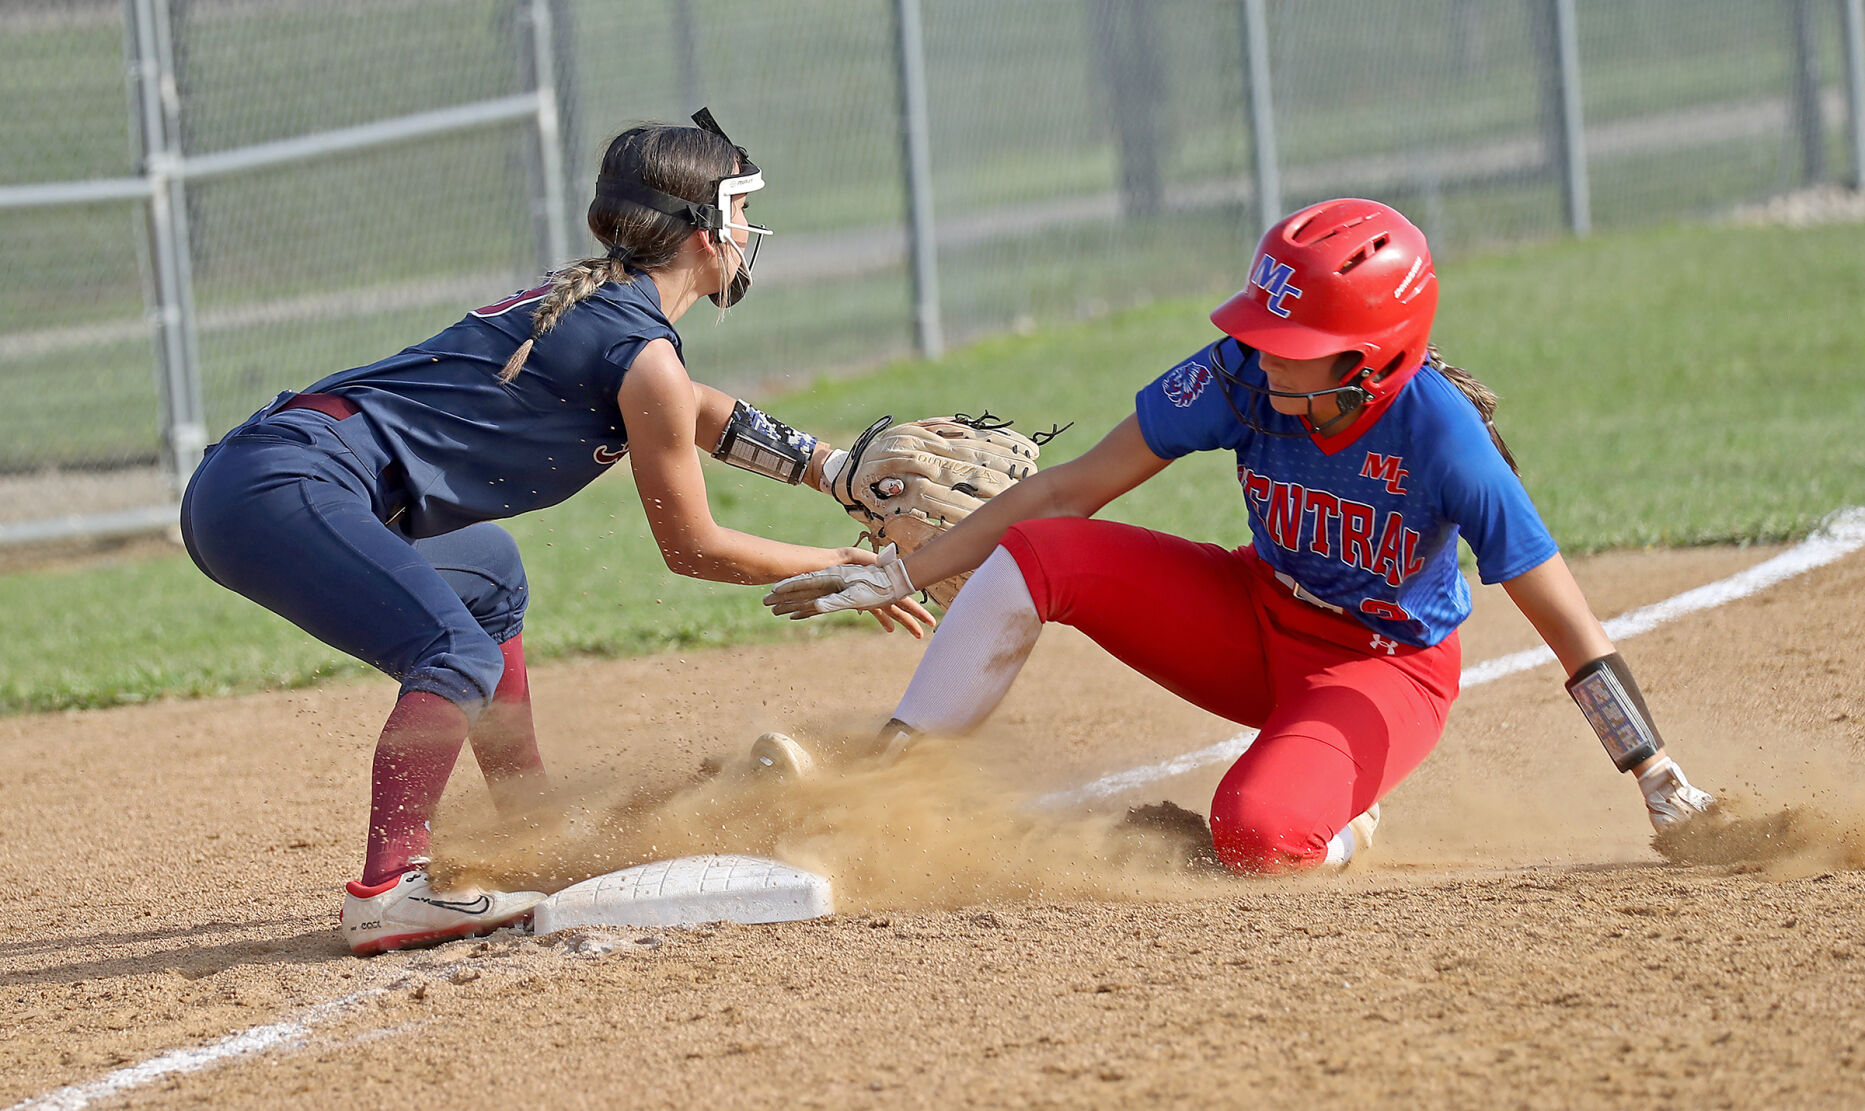 44th District Softball Championship: Madison Central and Madison Southern Vie for Title Clash